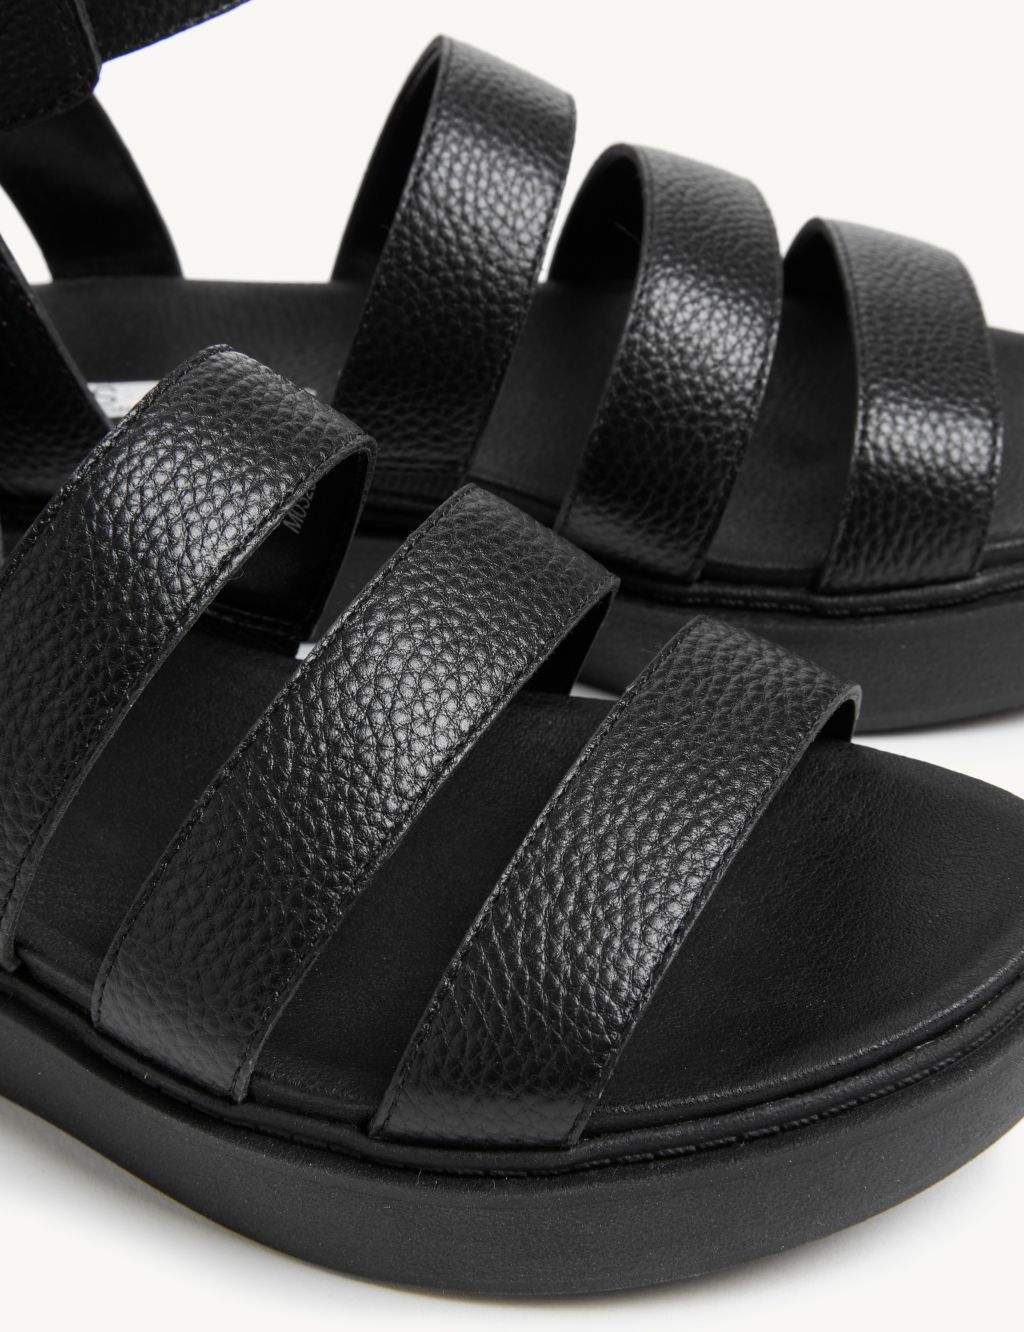 Leather Ankle Strap Flat Sandals image 3